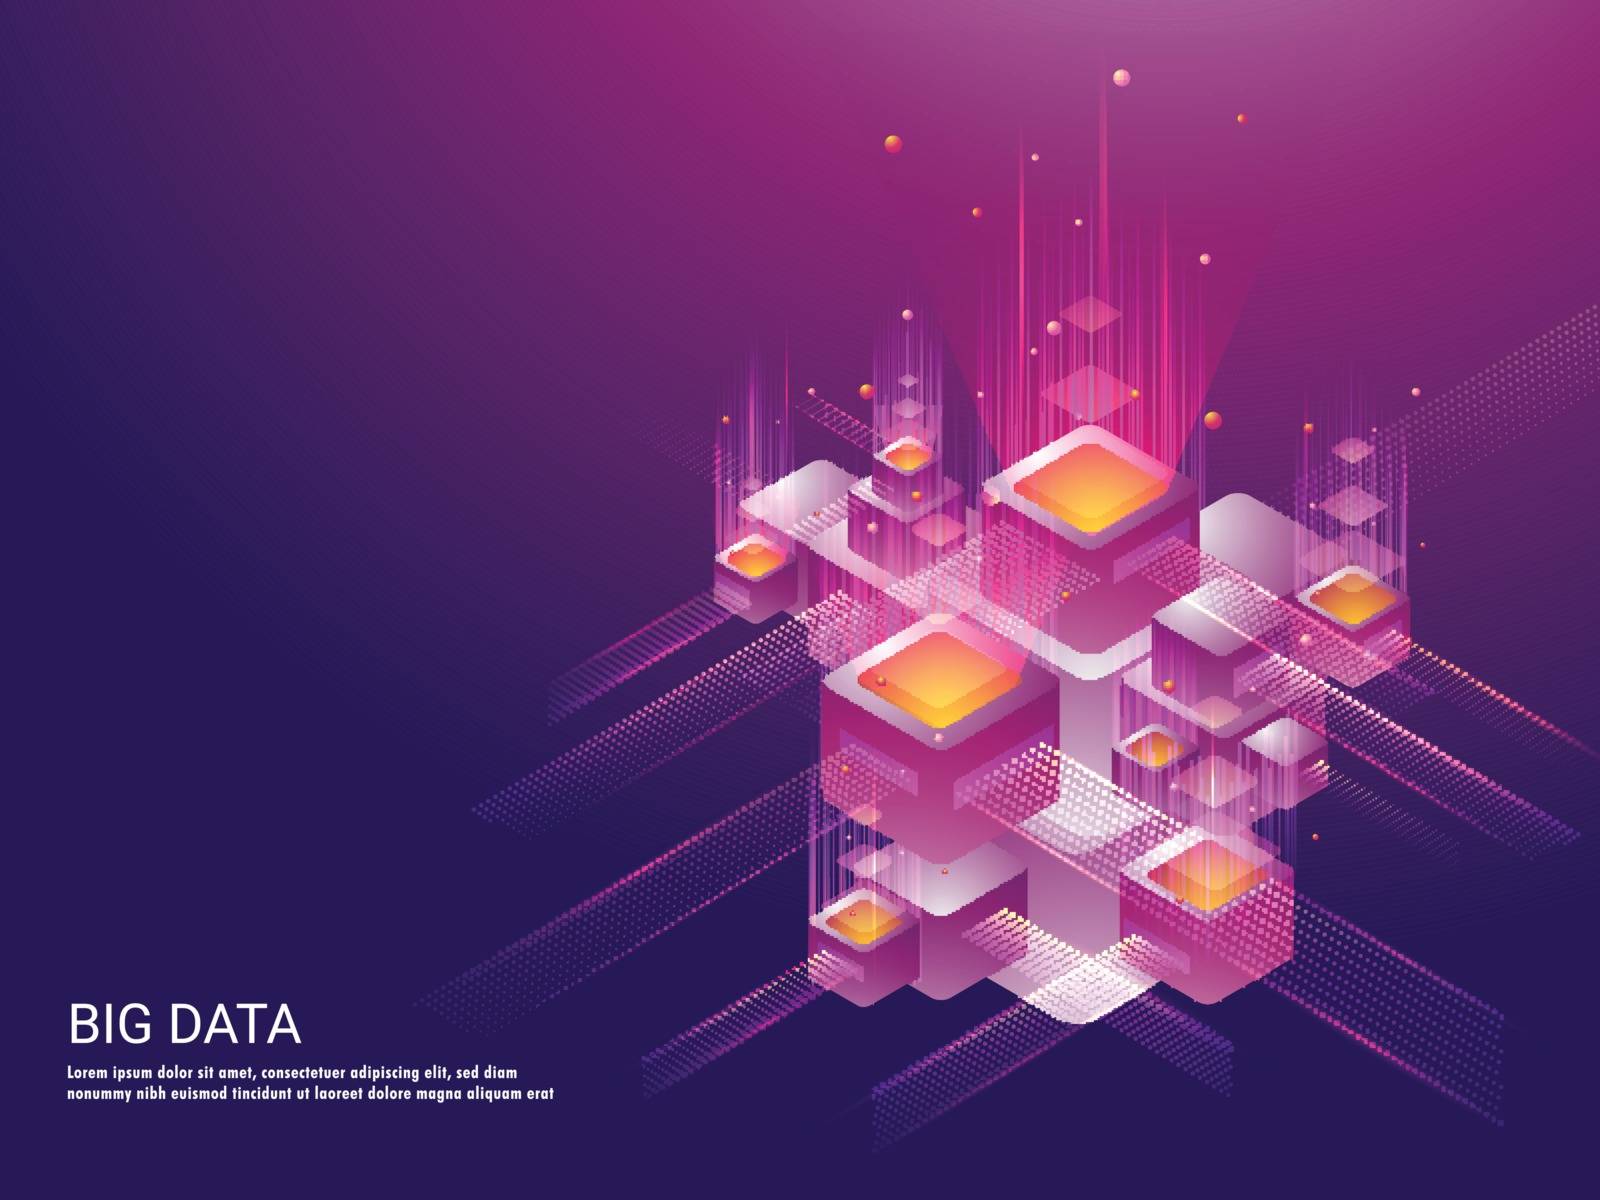 Big Data concept based isometric illustration of glowing servers and abstract elements on shiny purple background.